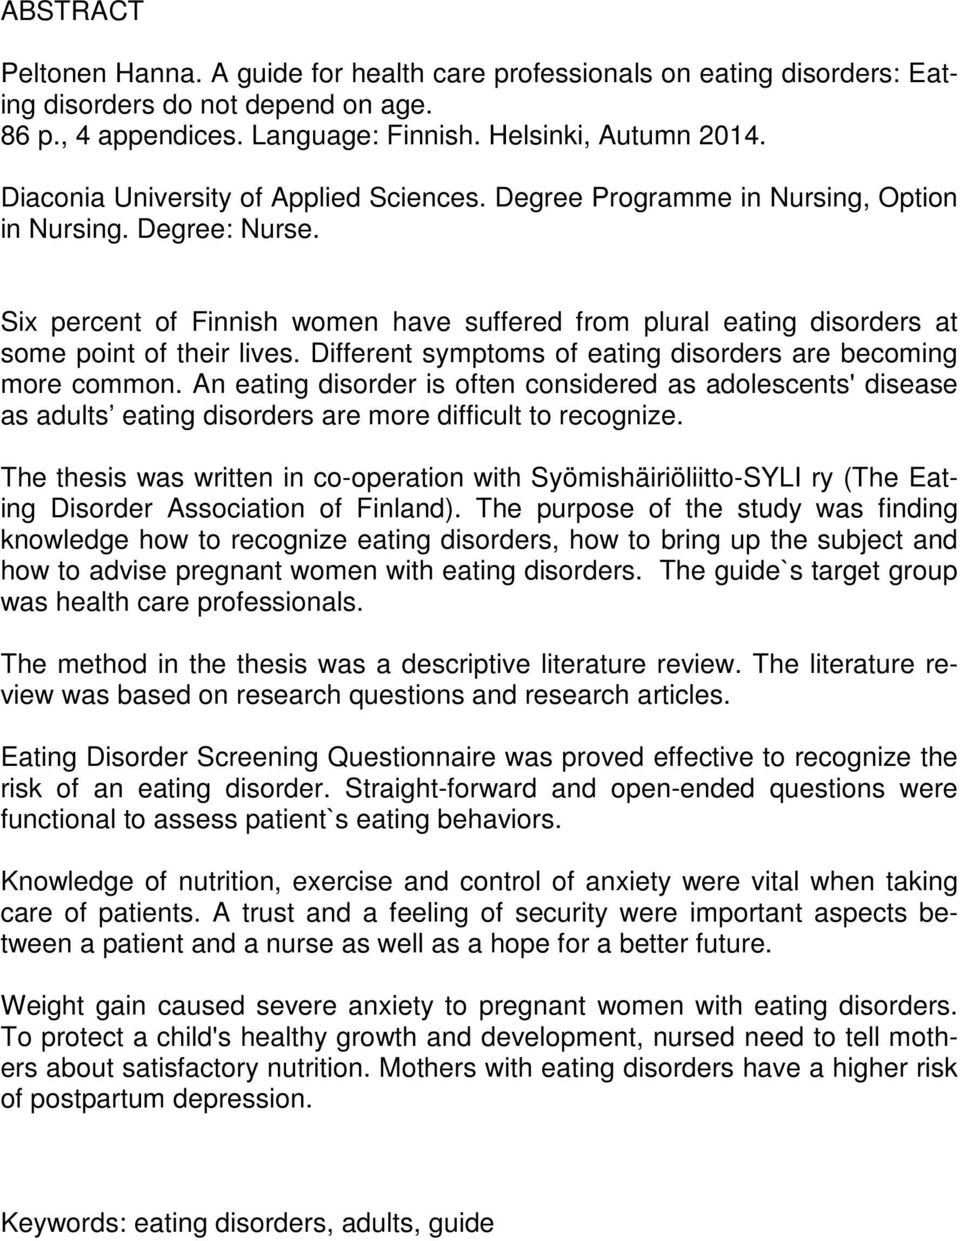 Six percent of Finnish women have suffered from plural eating disorders at some point of their lives. Different symptoms of eating disorders are becoming more common.